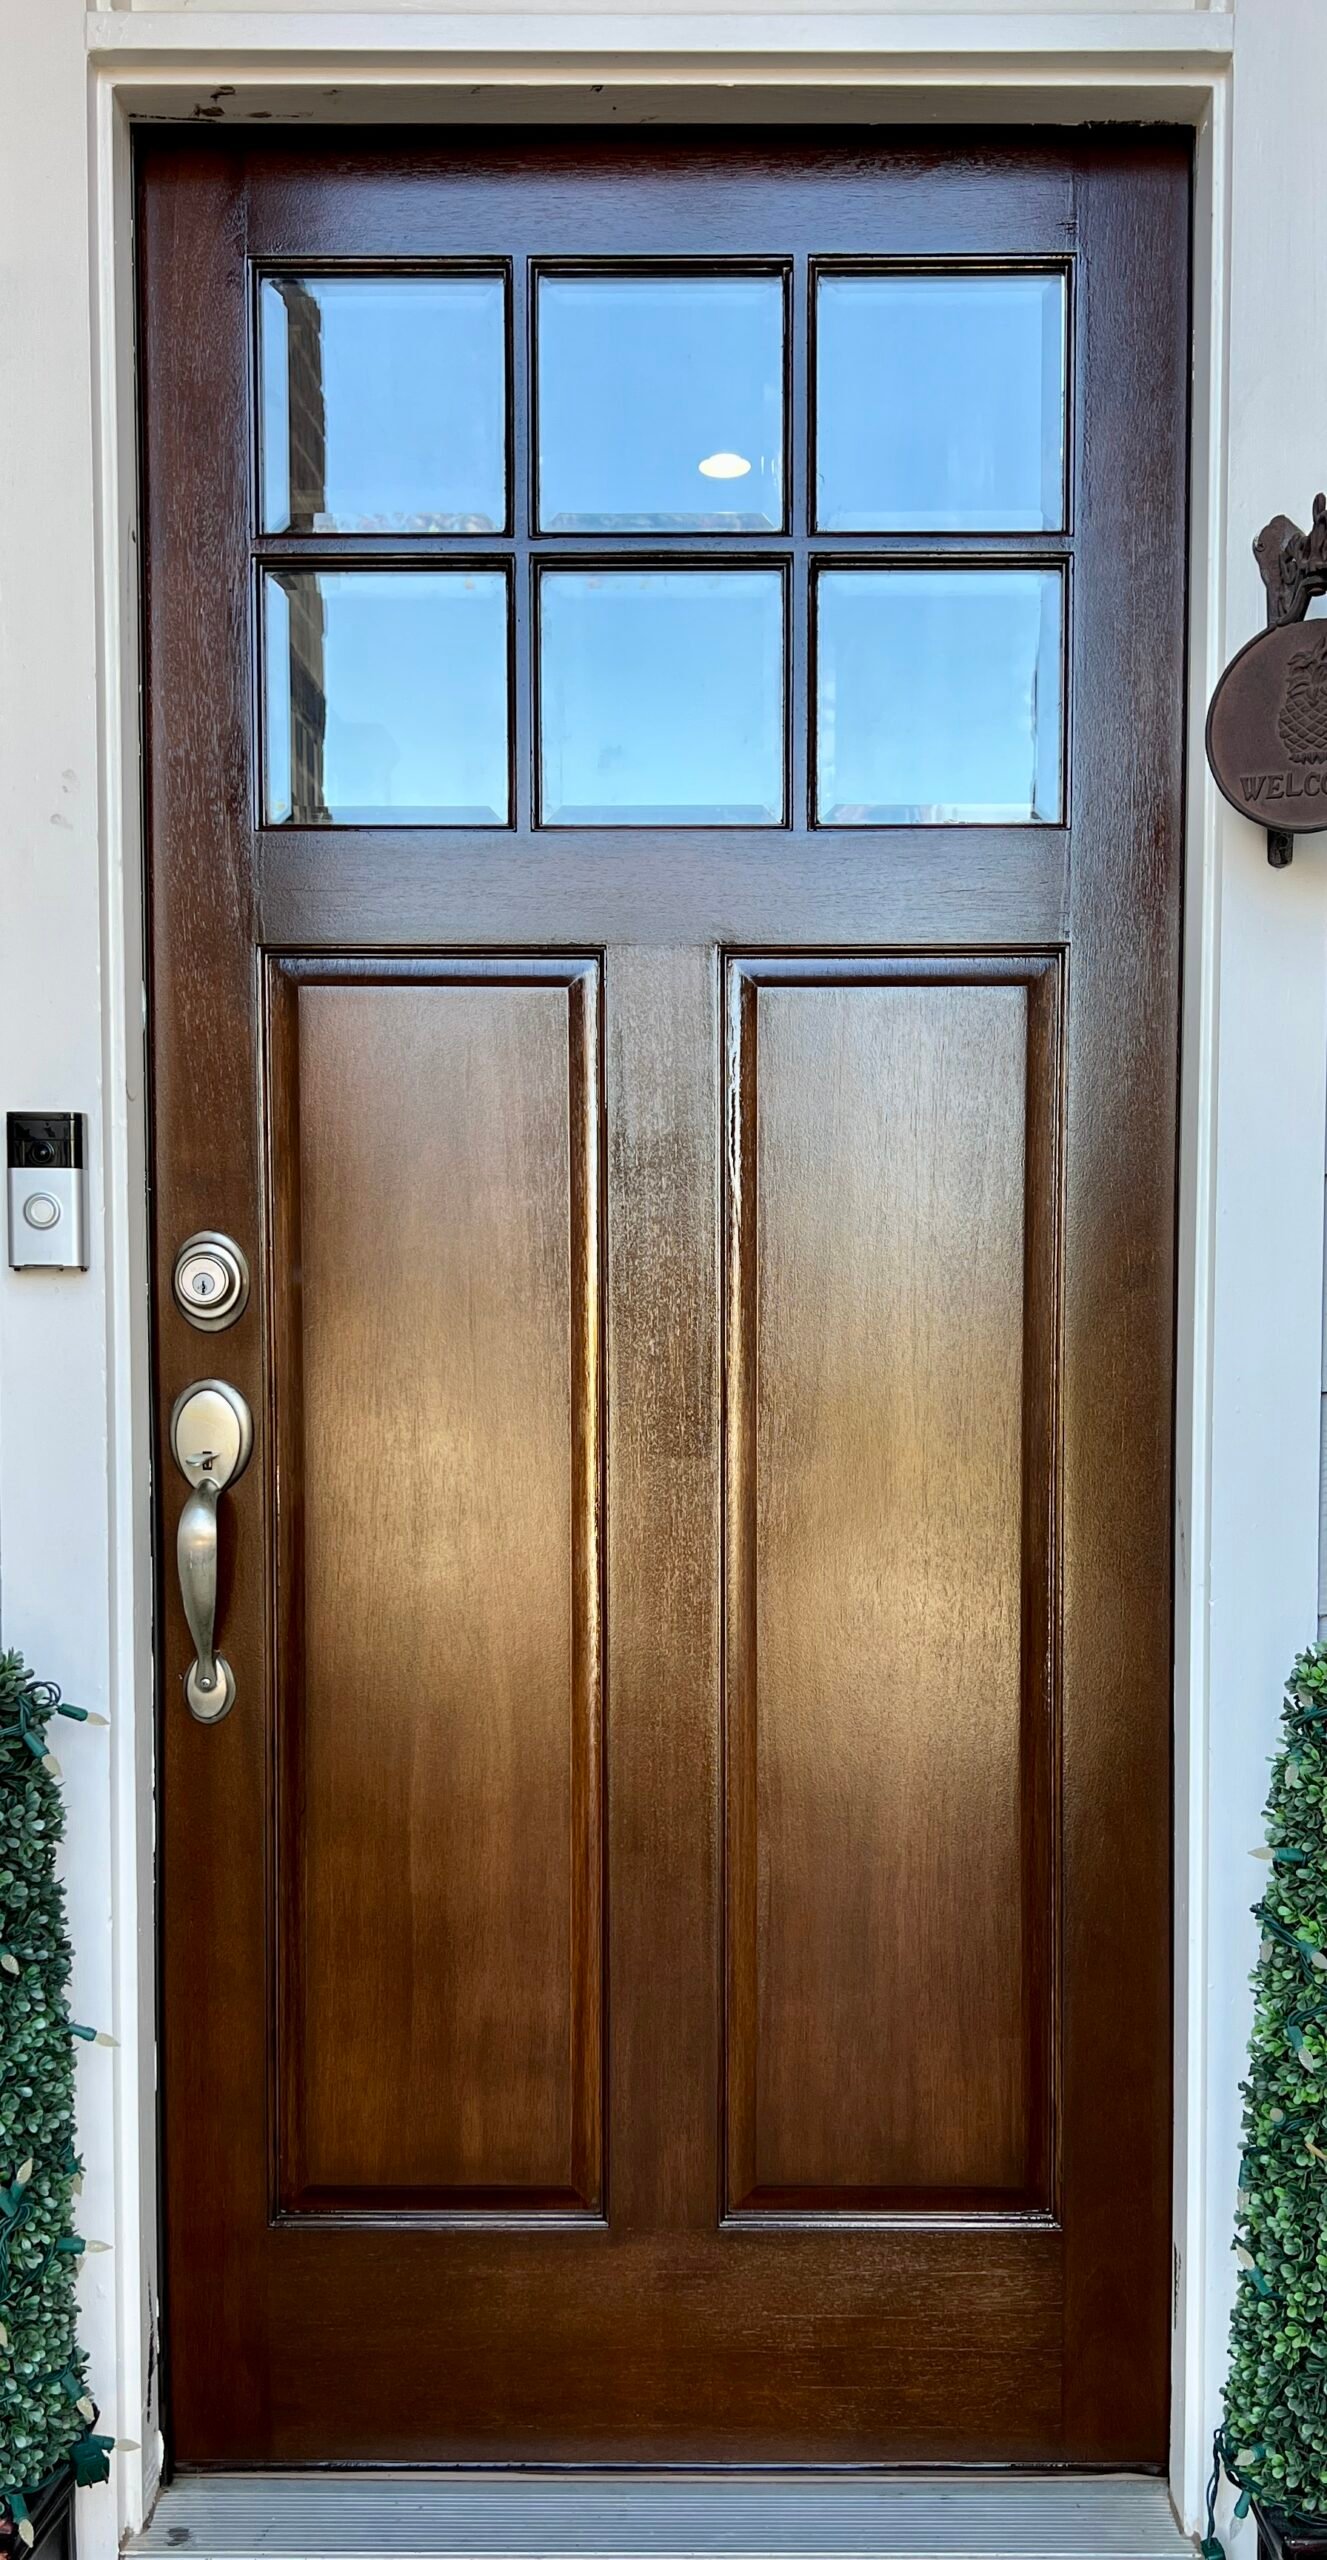 Refinished wooden door with a smooth, polished finish